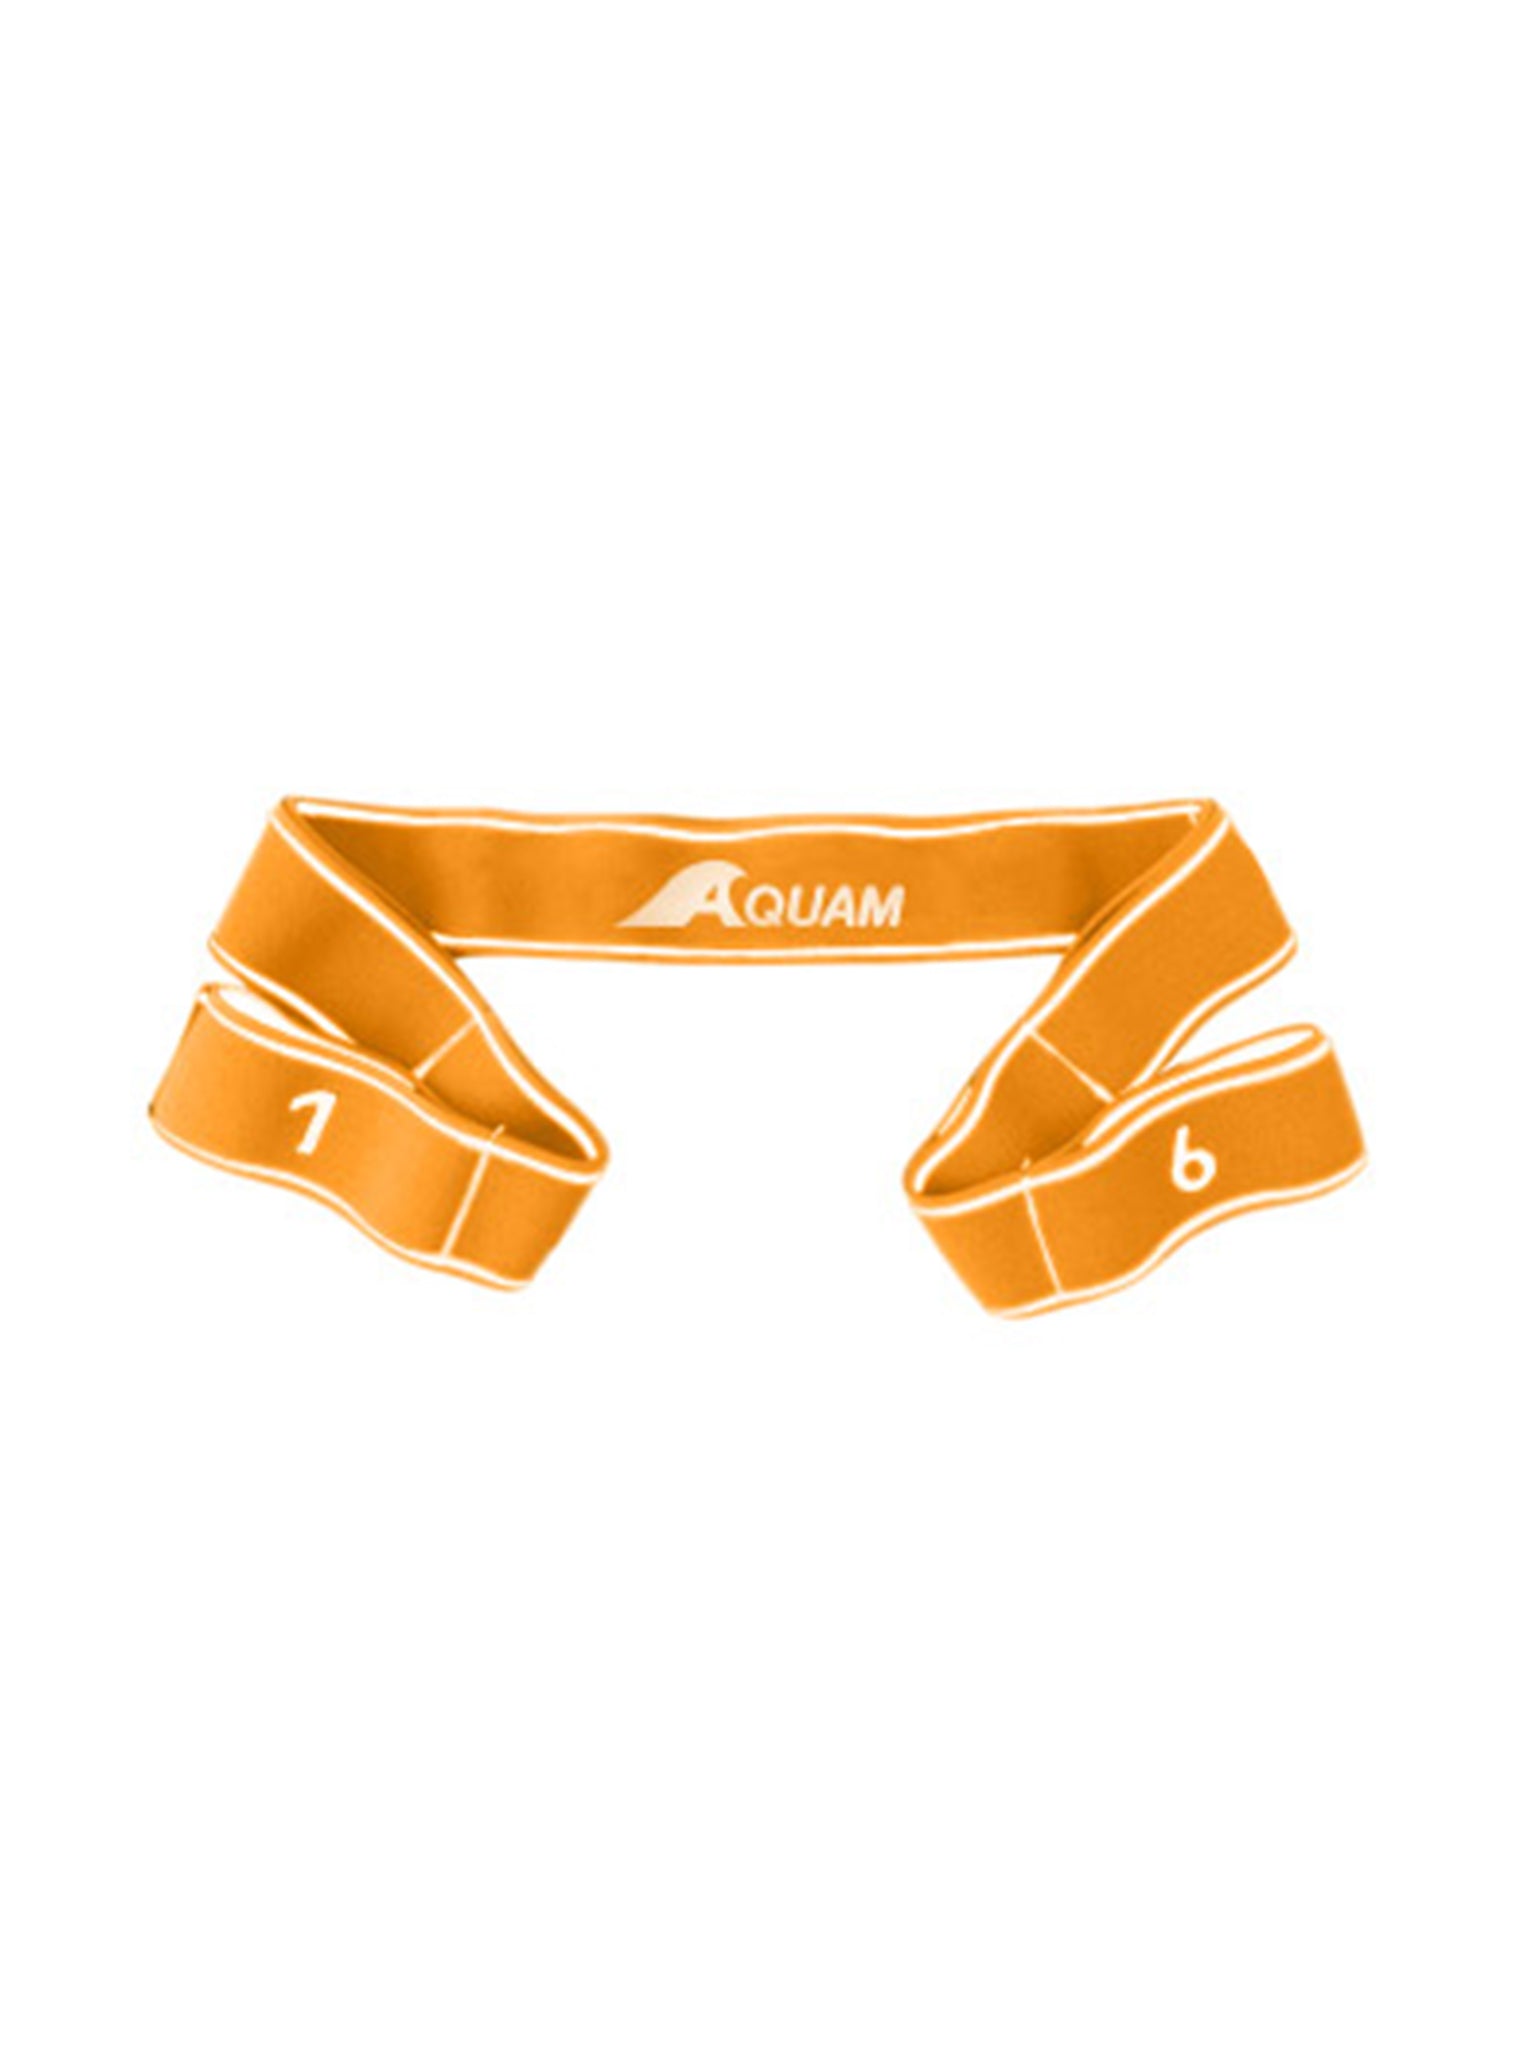 Soloband Resistance Band